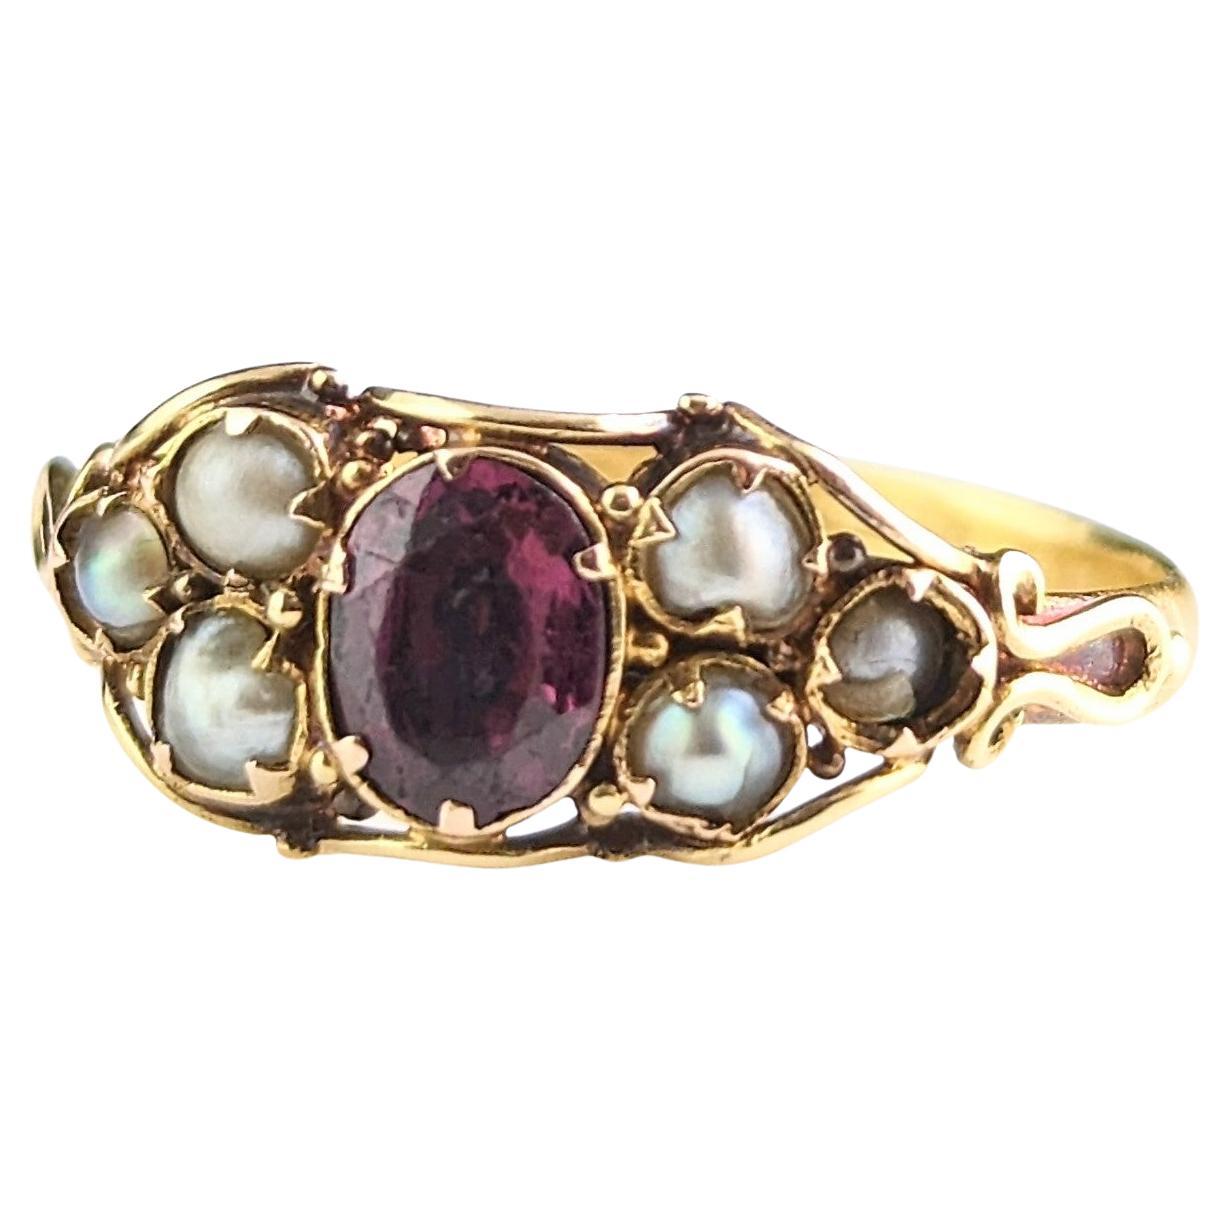 Antique Almandine Garnet and Pearl Ring, 22k Yellow Gold